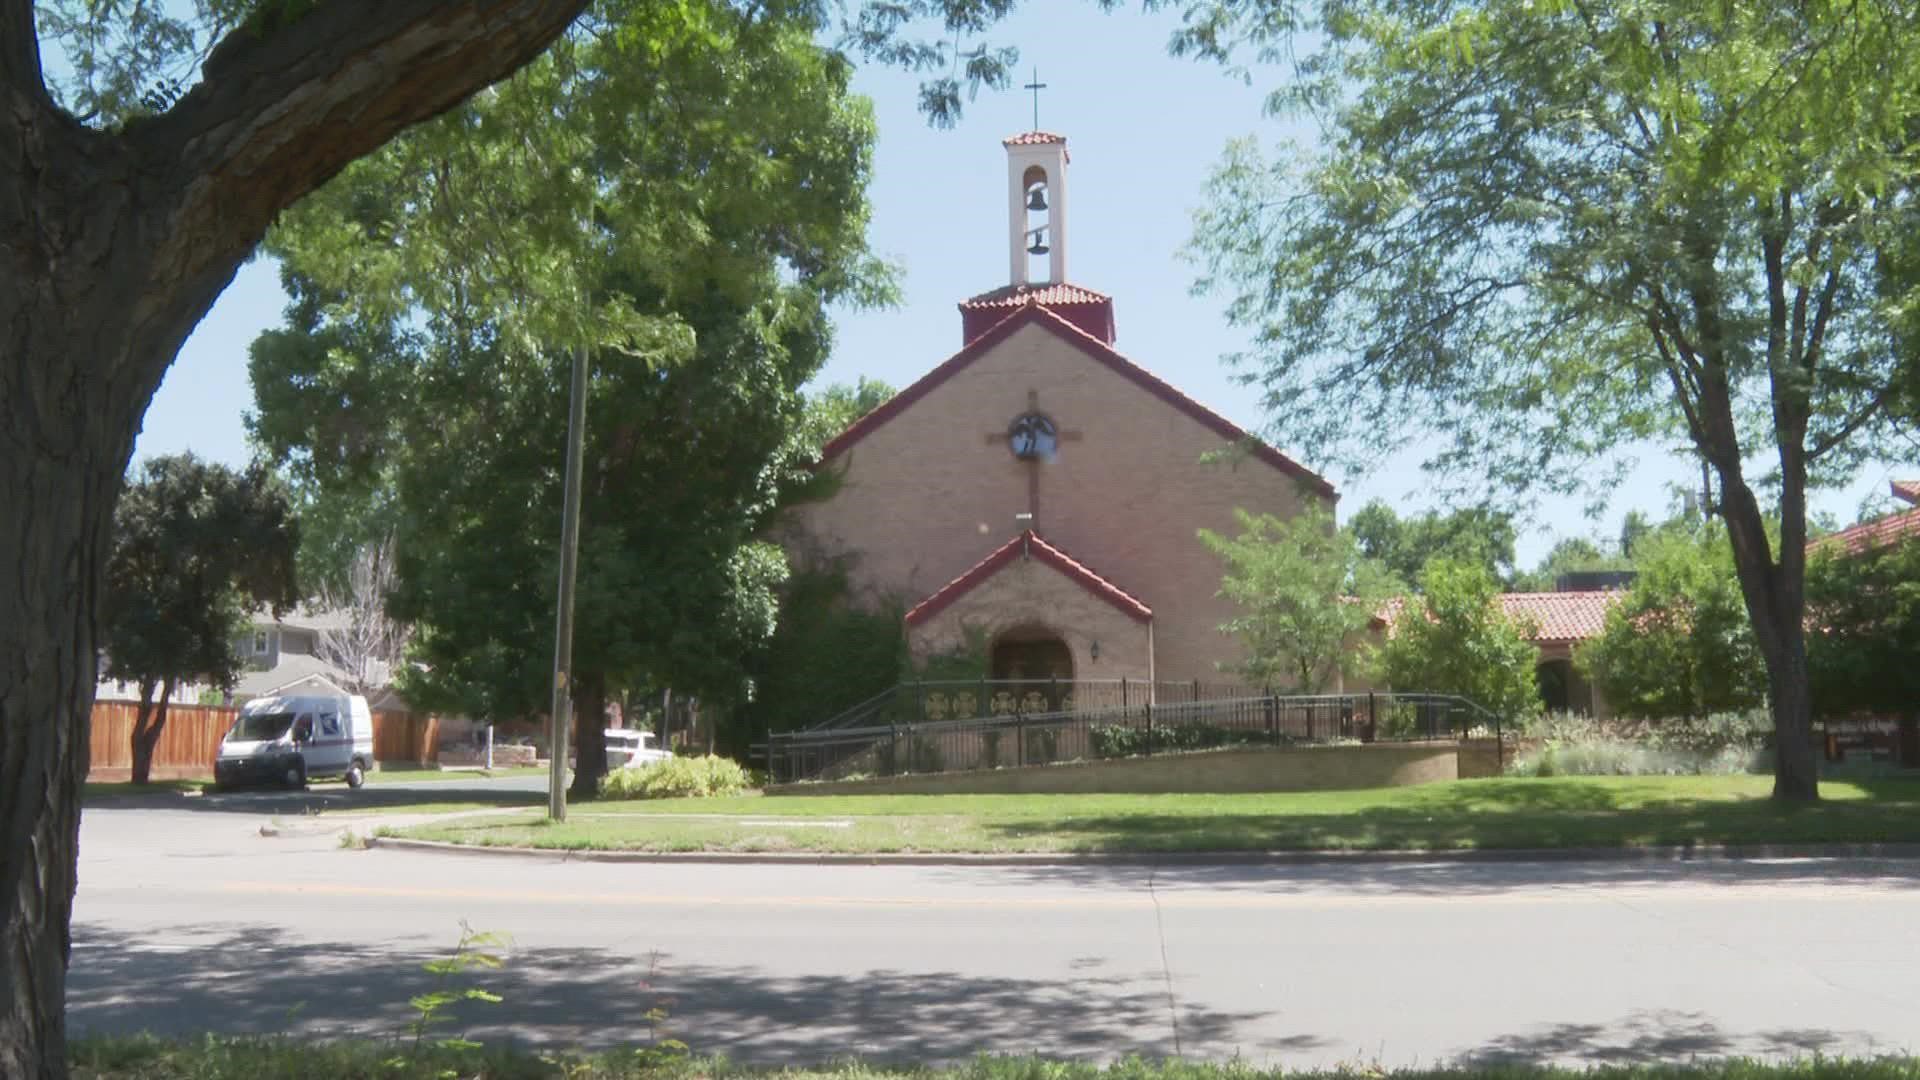 A sex abuse survivor is coming forward, filing a lawsuit against the Episcopal Diocese of Colorado, St. Michael and All Angels Church, and St. Barnabas Church camps.